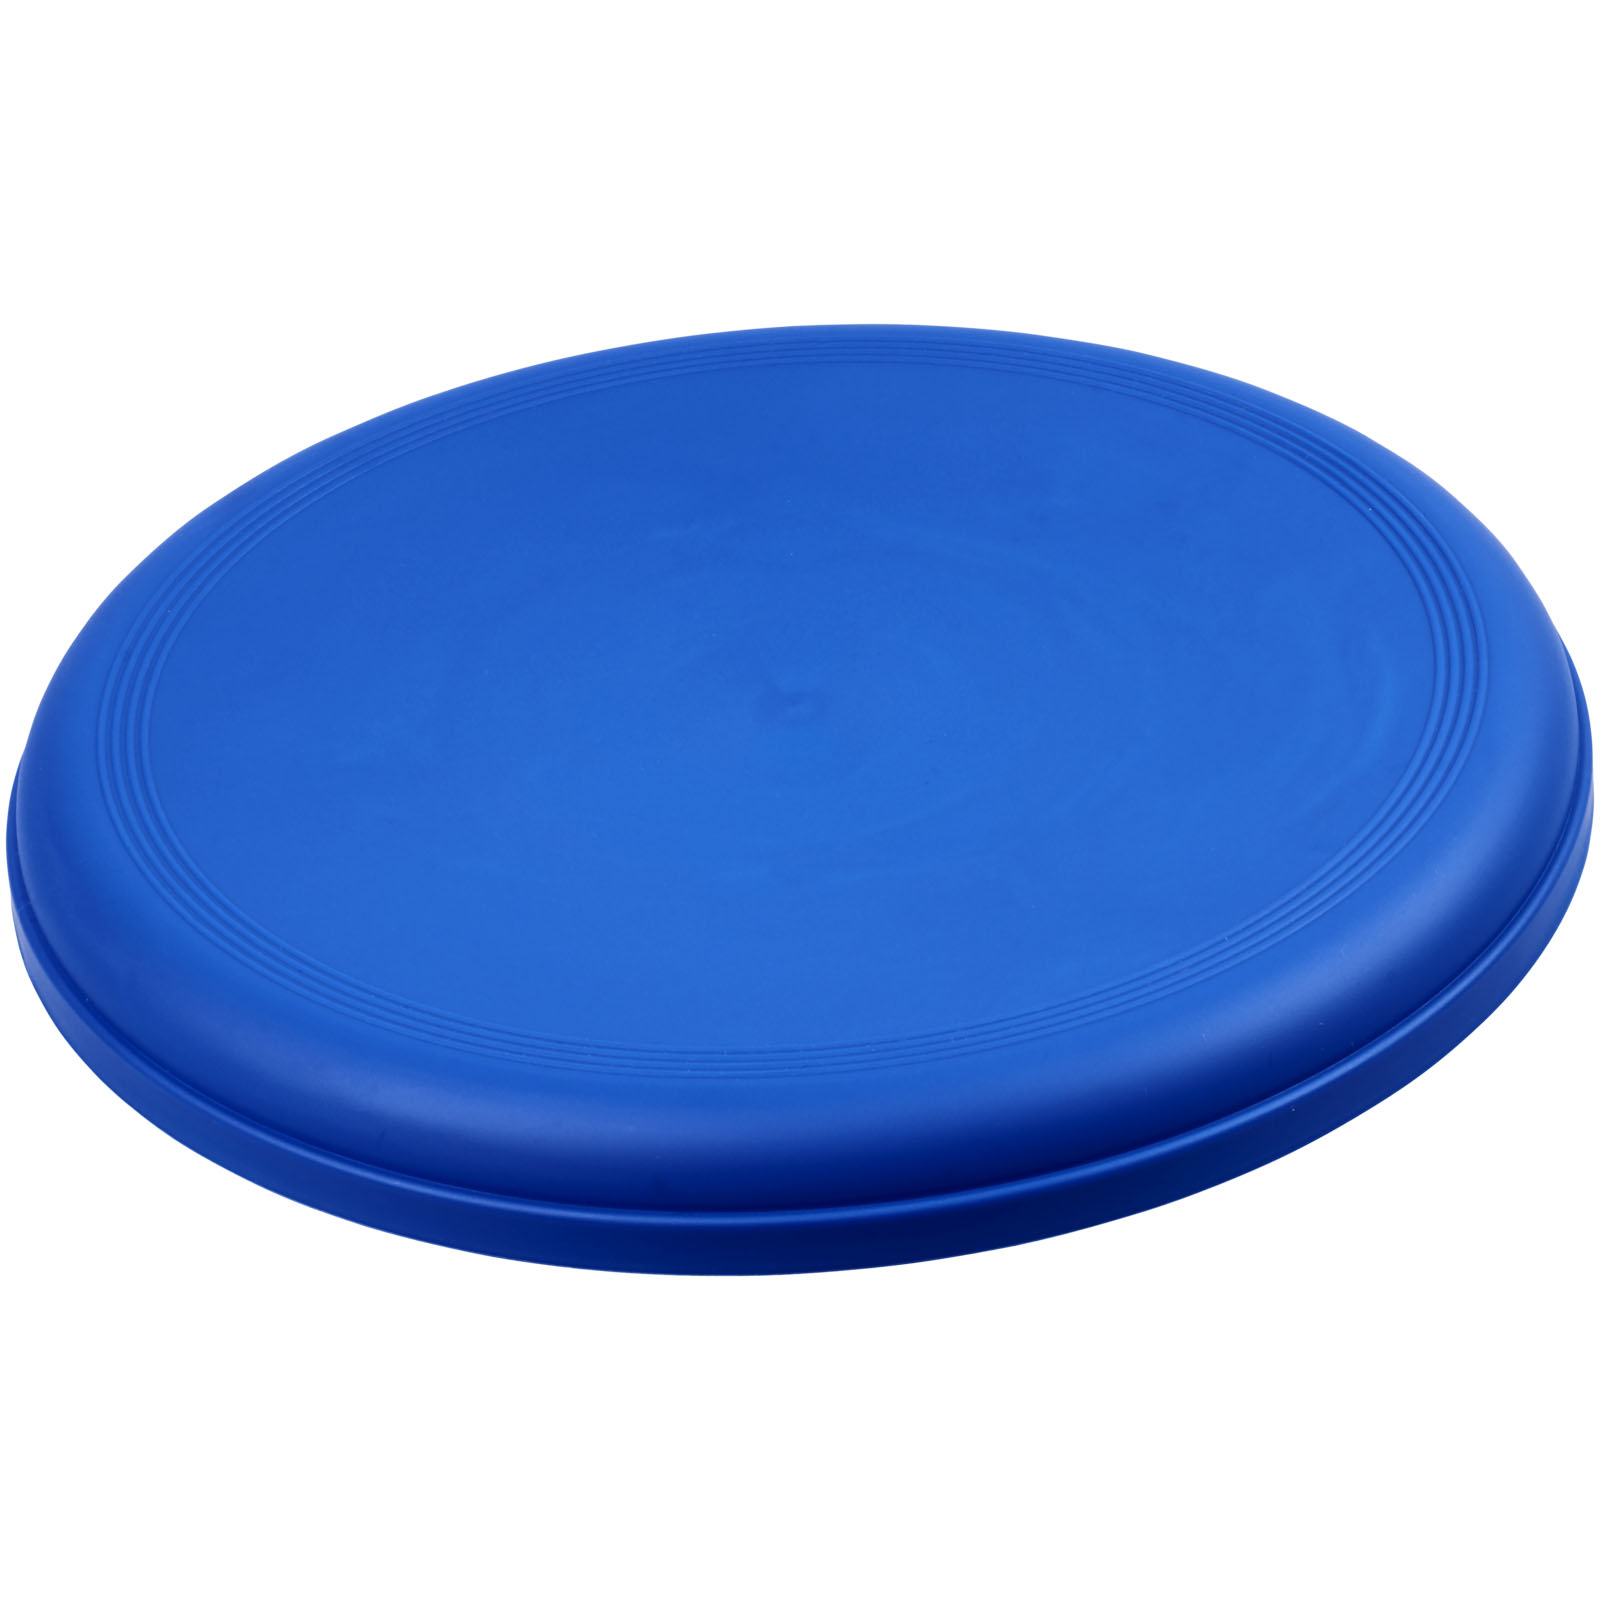 Toys & Games - Max plastic dog frisbee